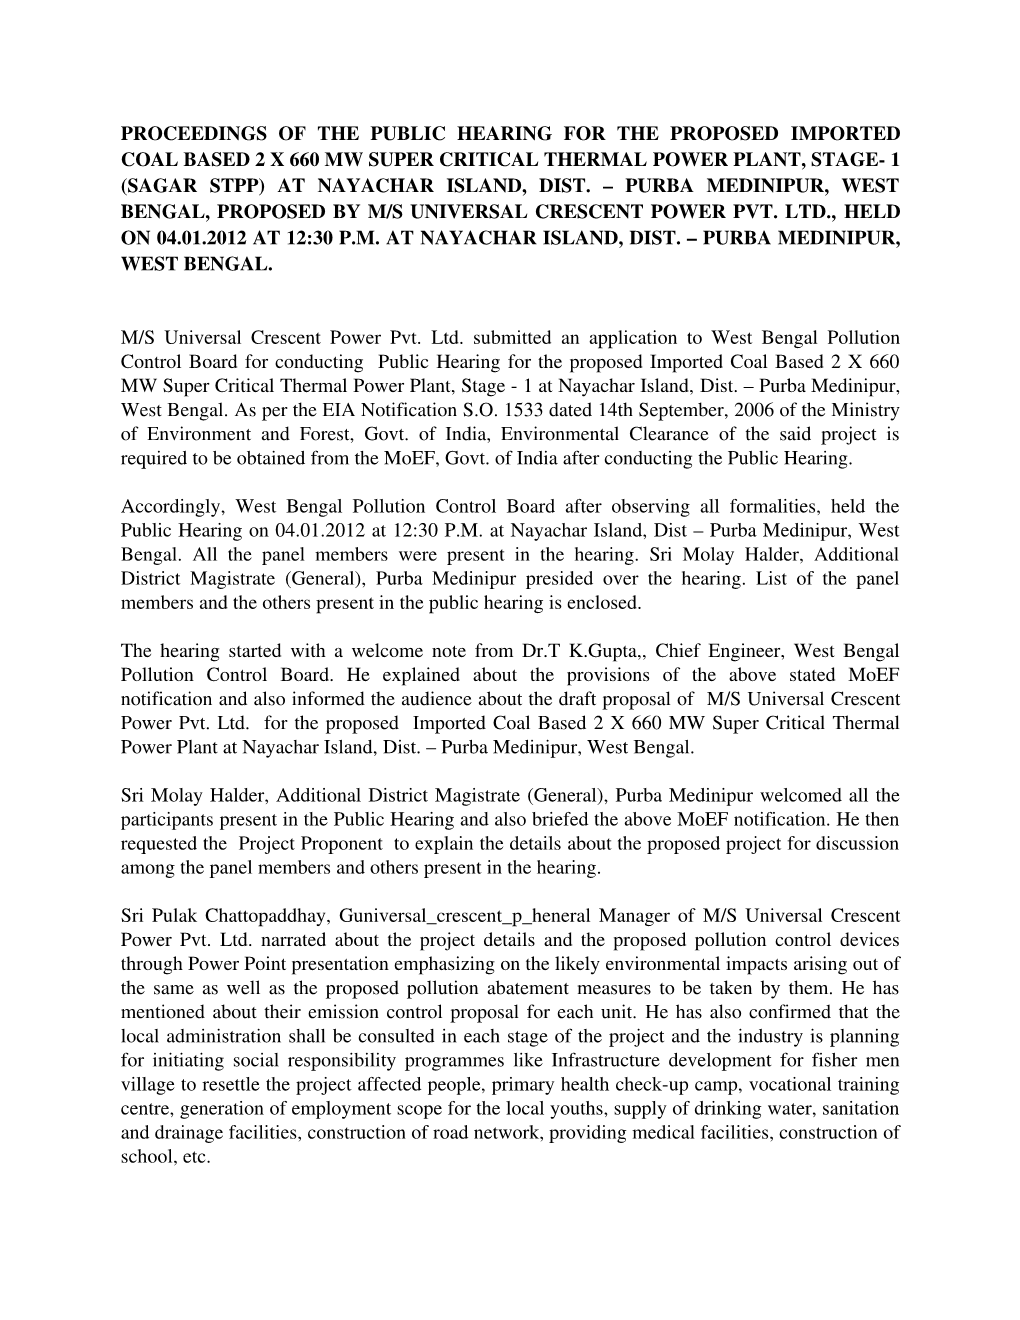 Proceedings of the Public Hearing for the Proposed 2X660 MW Super